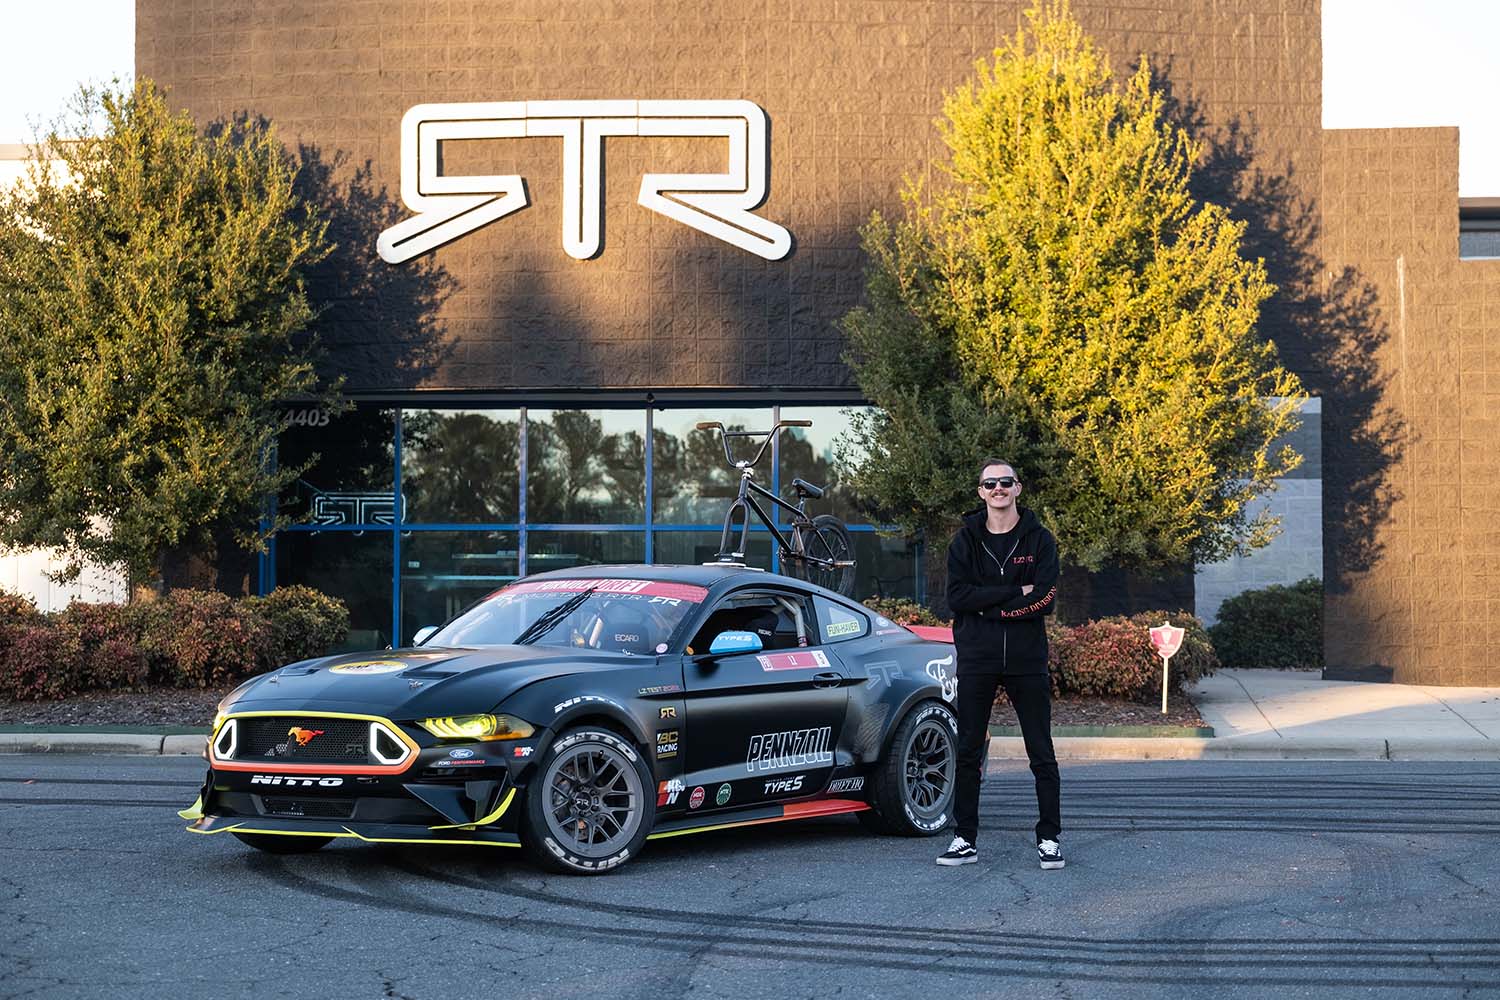 Adam LZ Joins the RTR Team